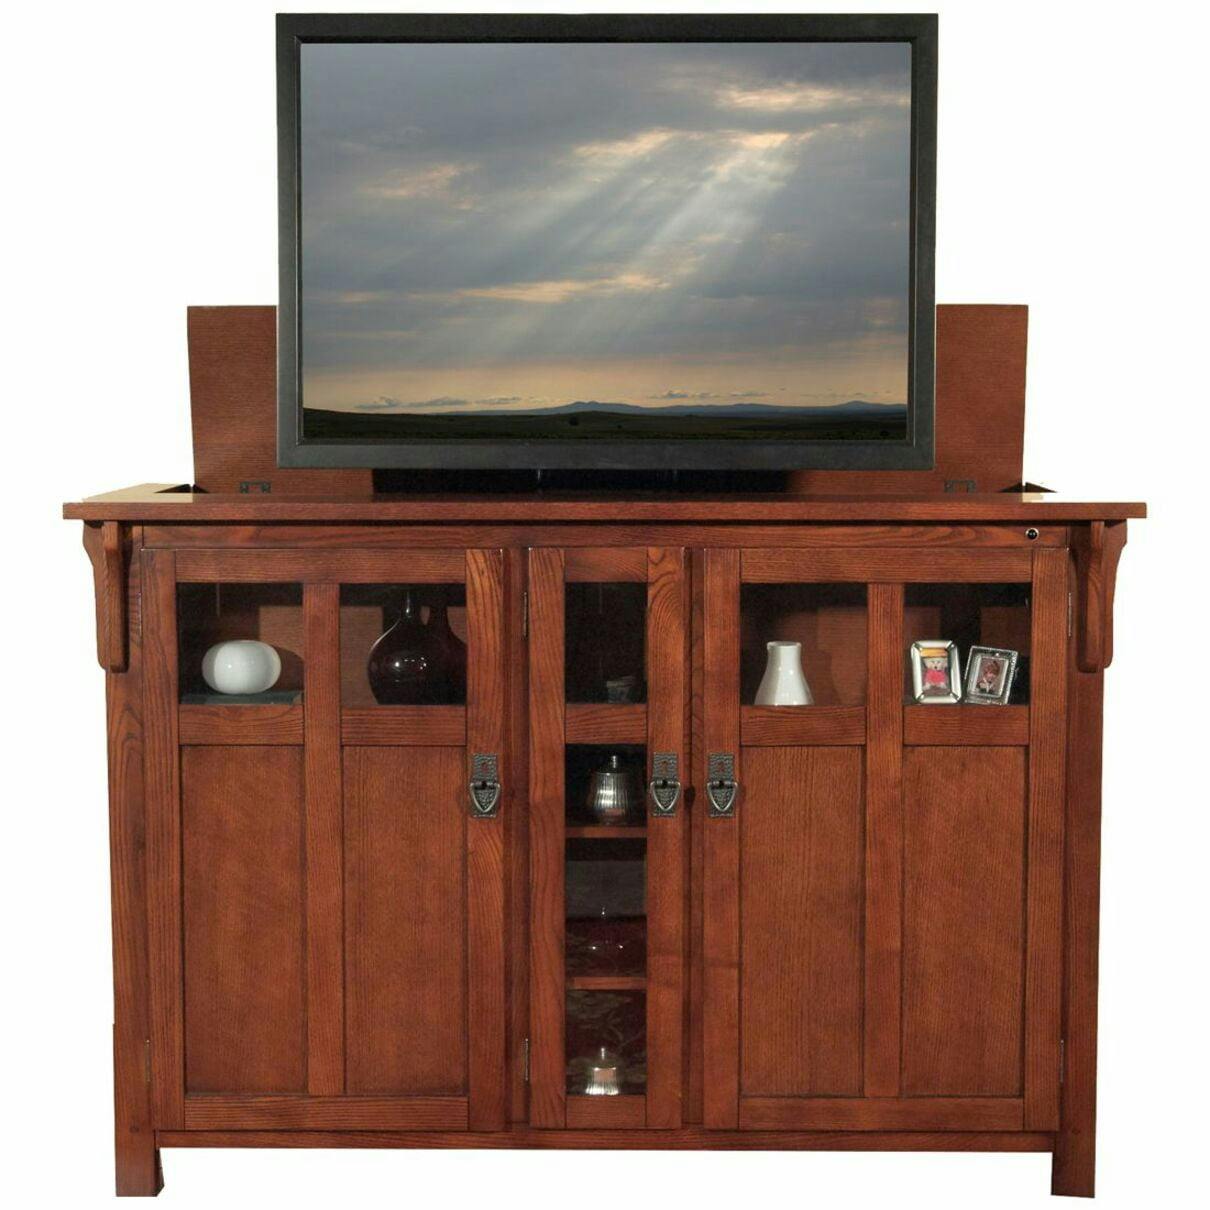 Bungalow Chestnut Oak Smart TV Lift Cabinet with Integrated Storage